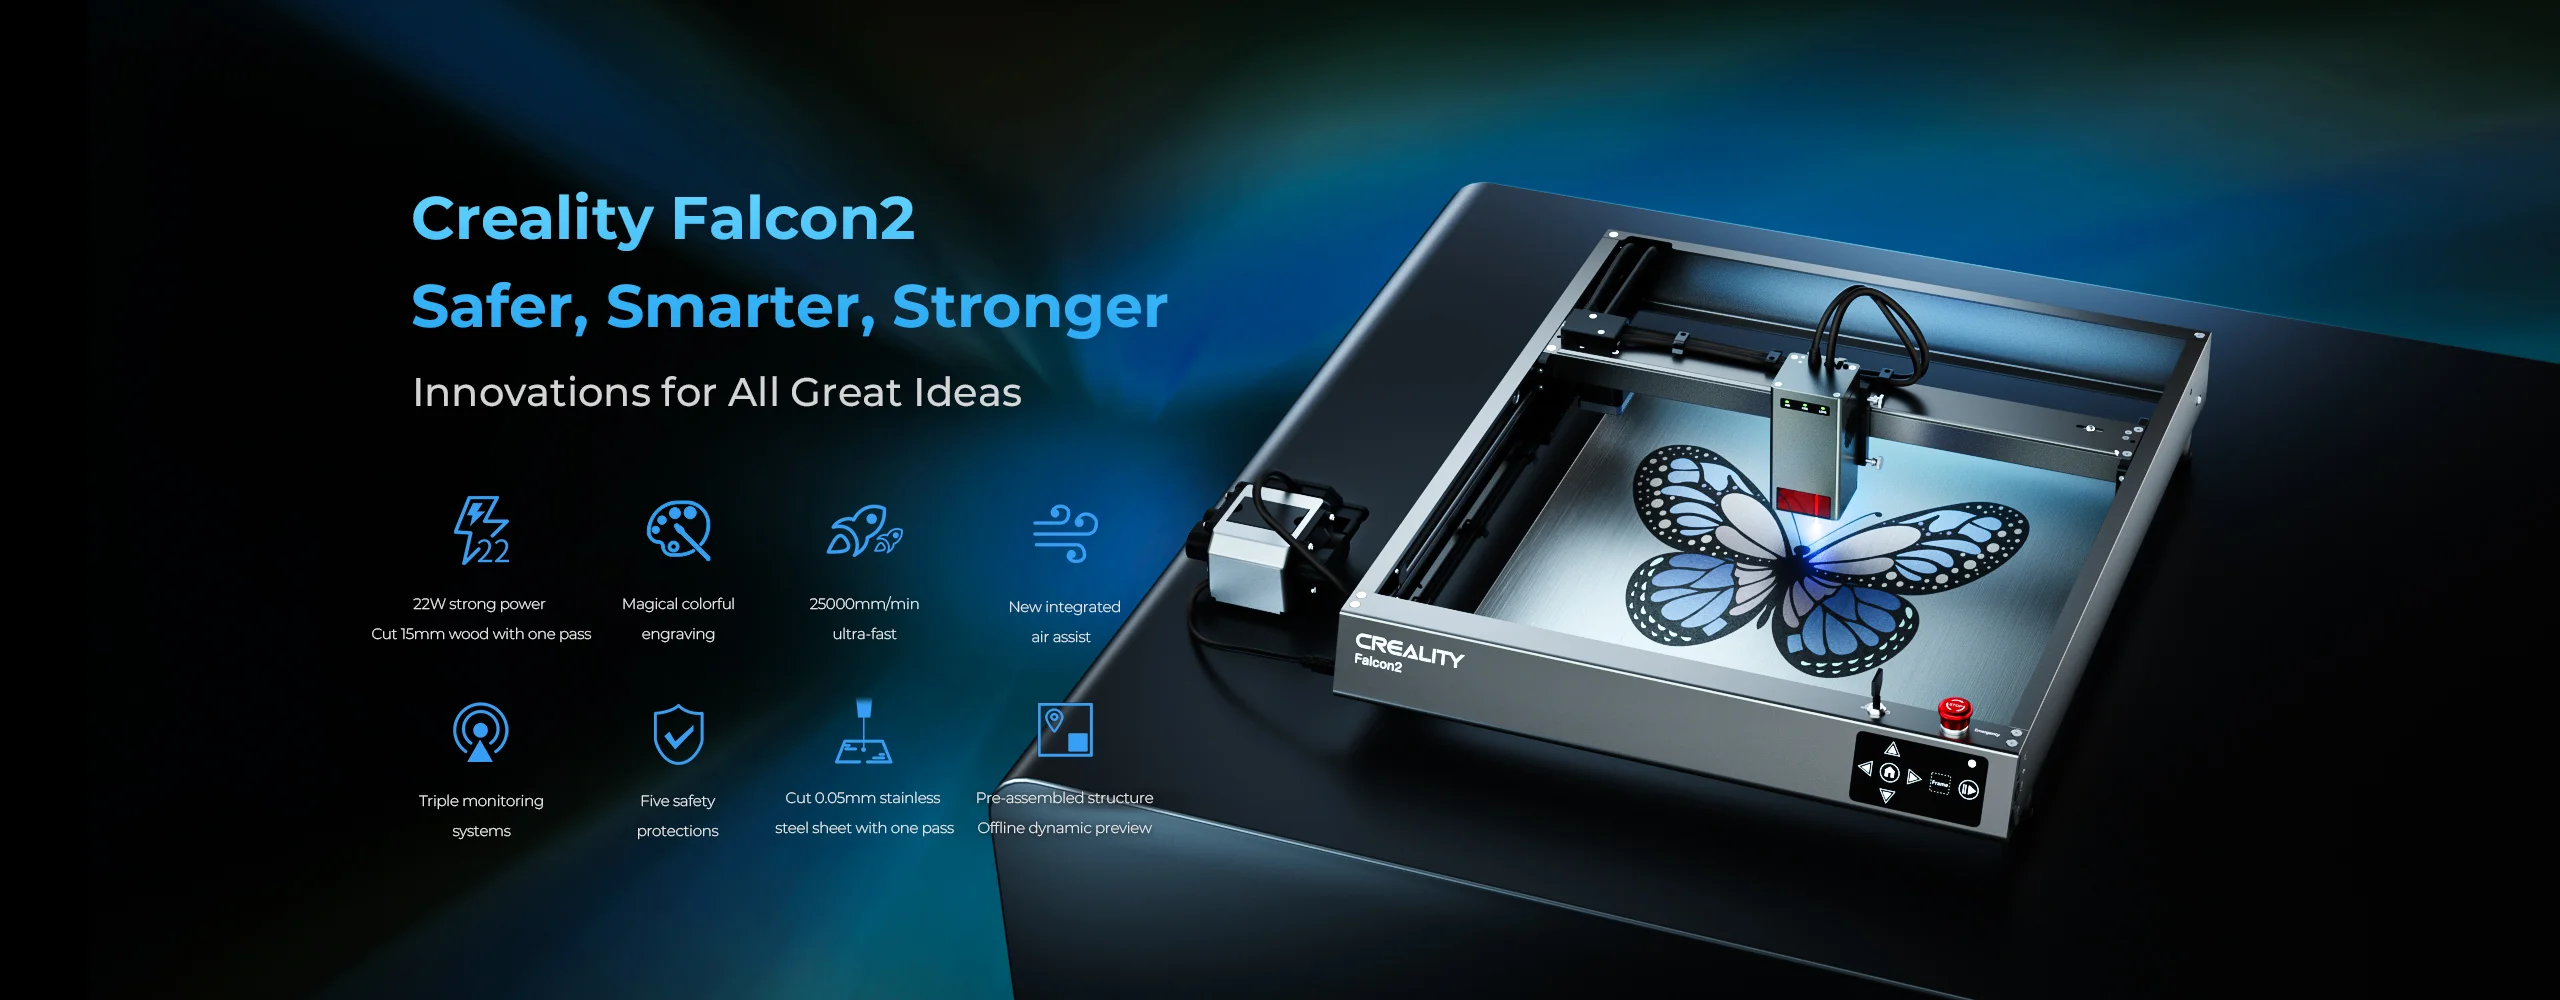 Creality Launches new Falcon2 40W laser engraver - specifications, pricing  and release information - 3D Printing Industry